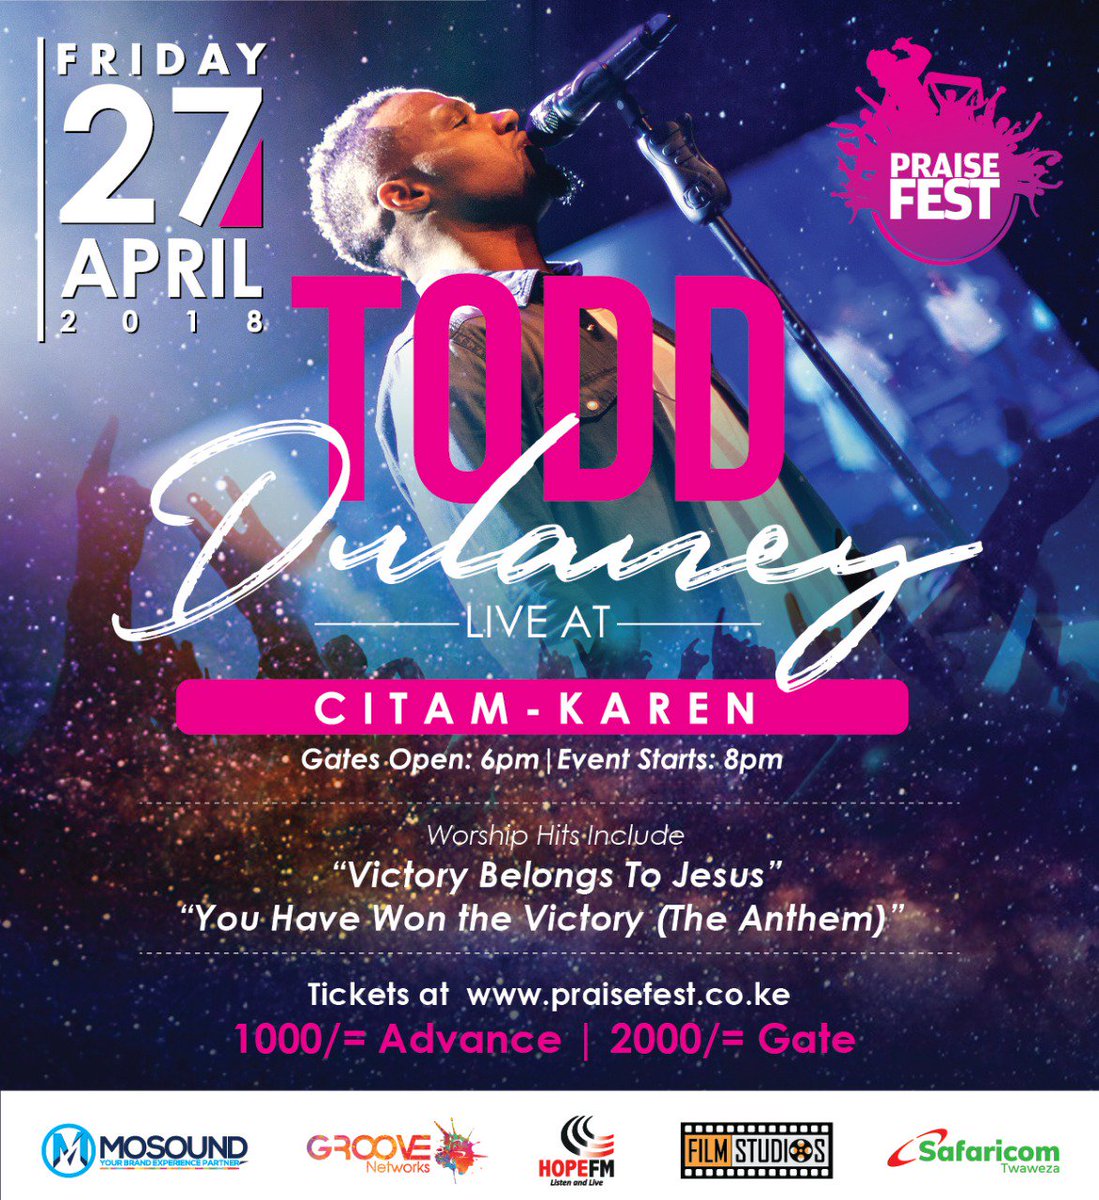 My heart has been beating fast since I saw this!!! God knows am more than excited to see this happening! Oh isn't His name greater! @ToddDulaney you're most welcome to Kenya! #StandForever #YoureGreatName #VictoryBelongsToJesus #TheAnthem